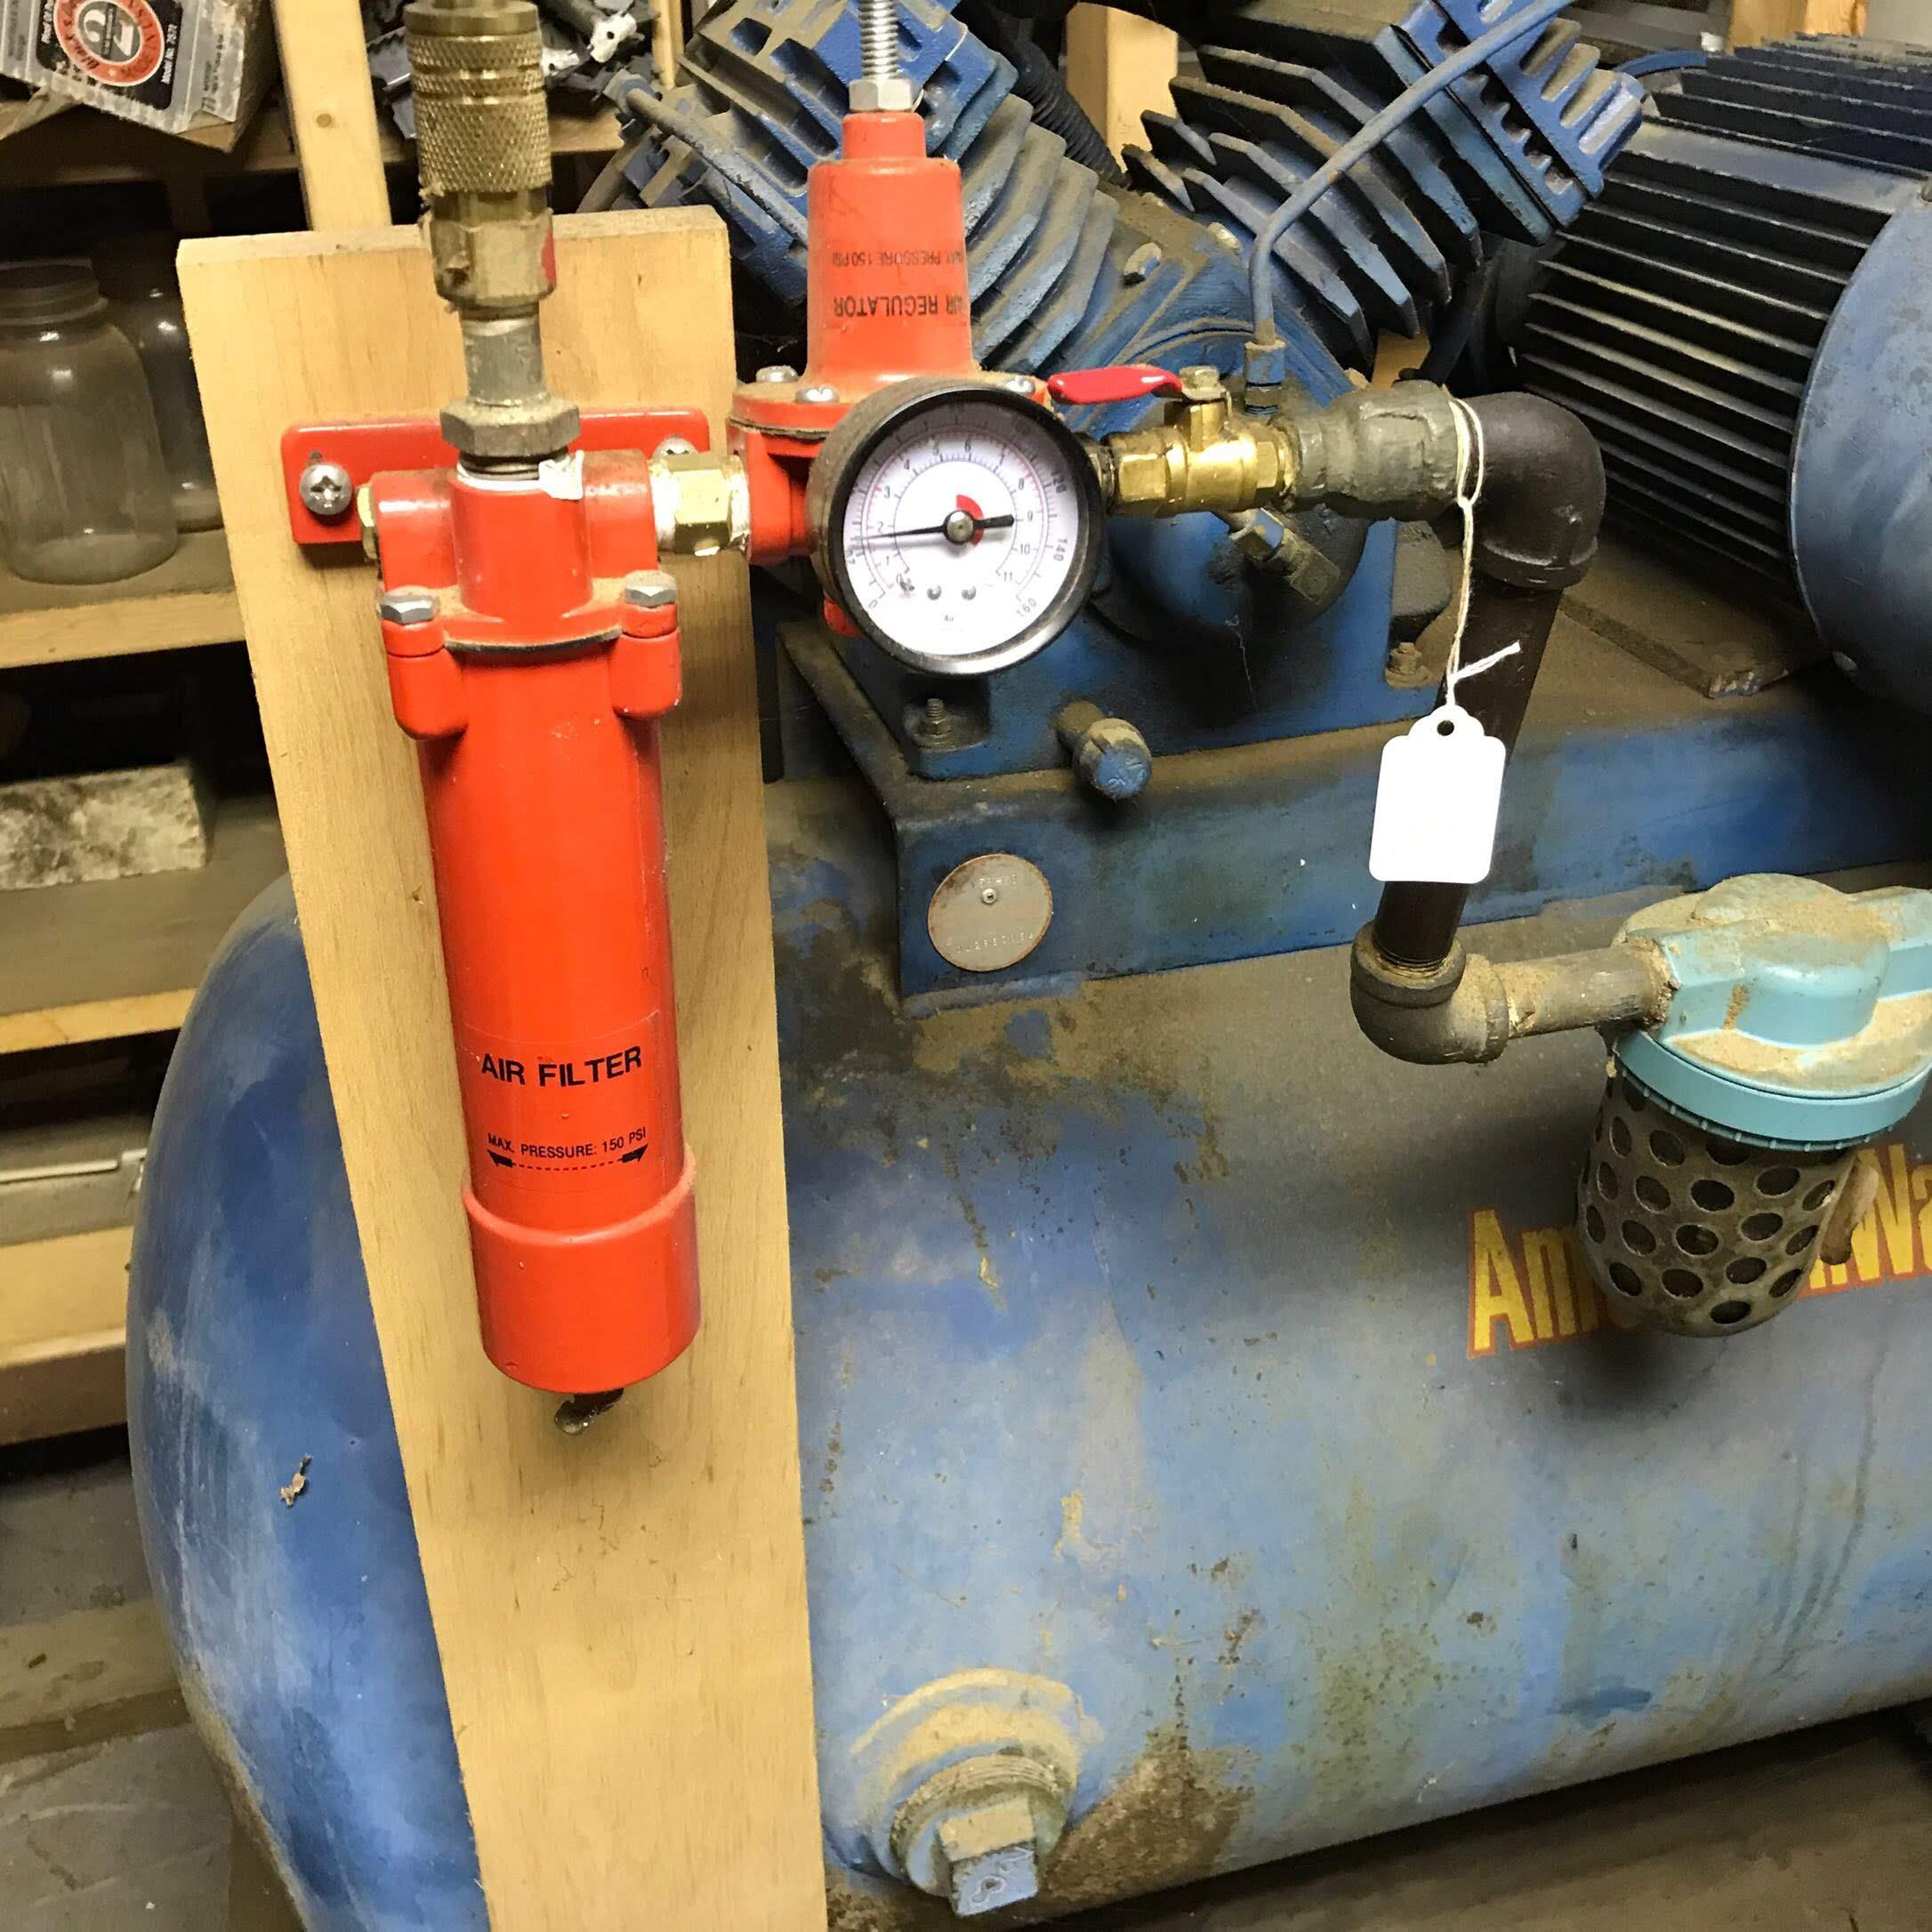 American Way Single Phase Air Compressor - Works!